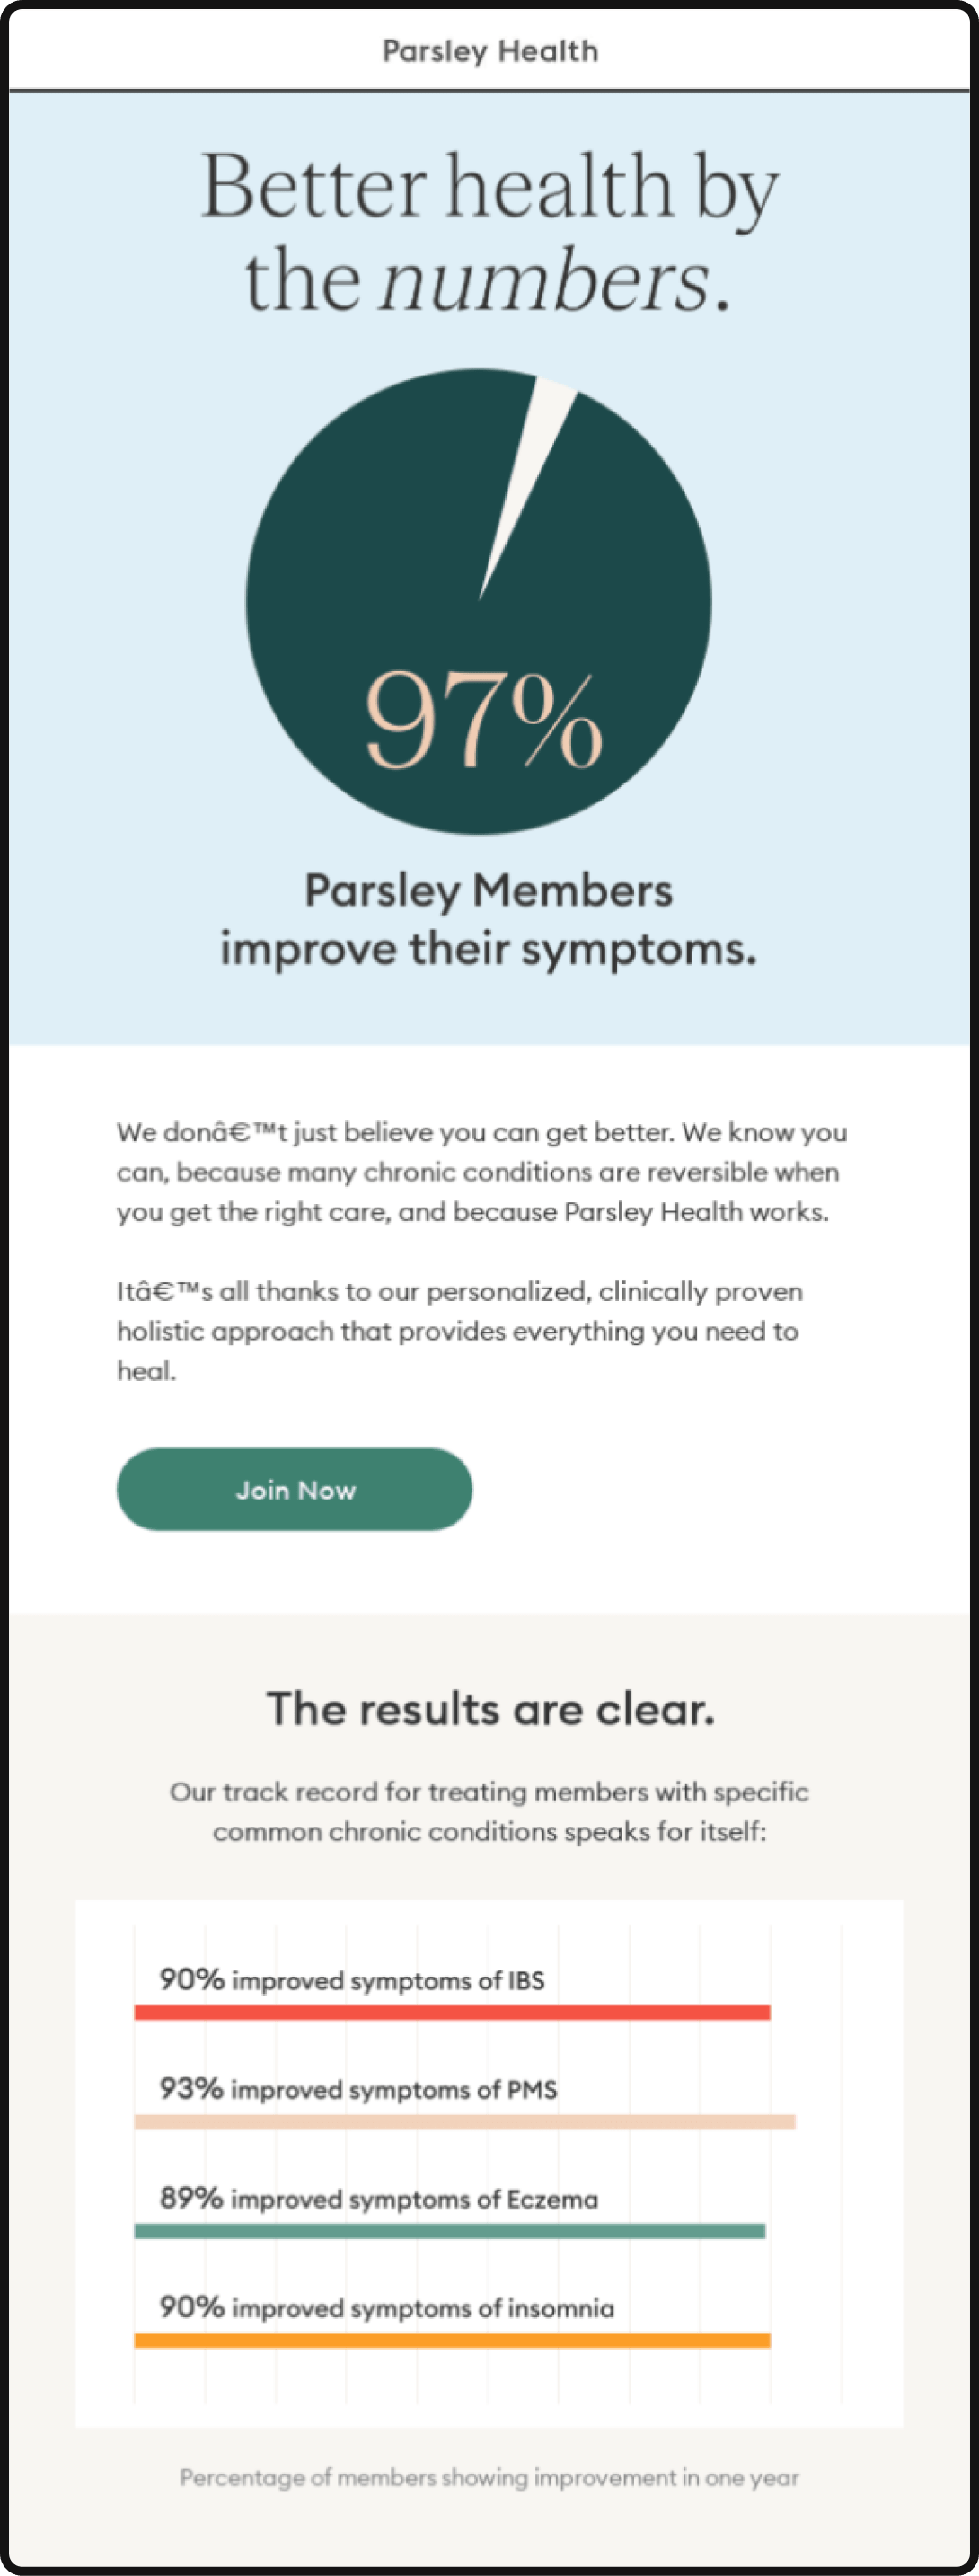 Parsley Health: Better health by the numbers